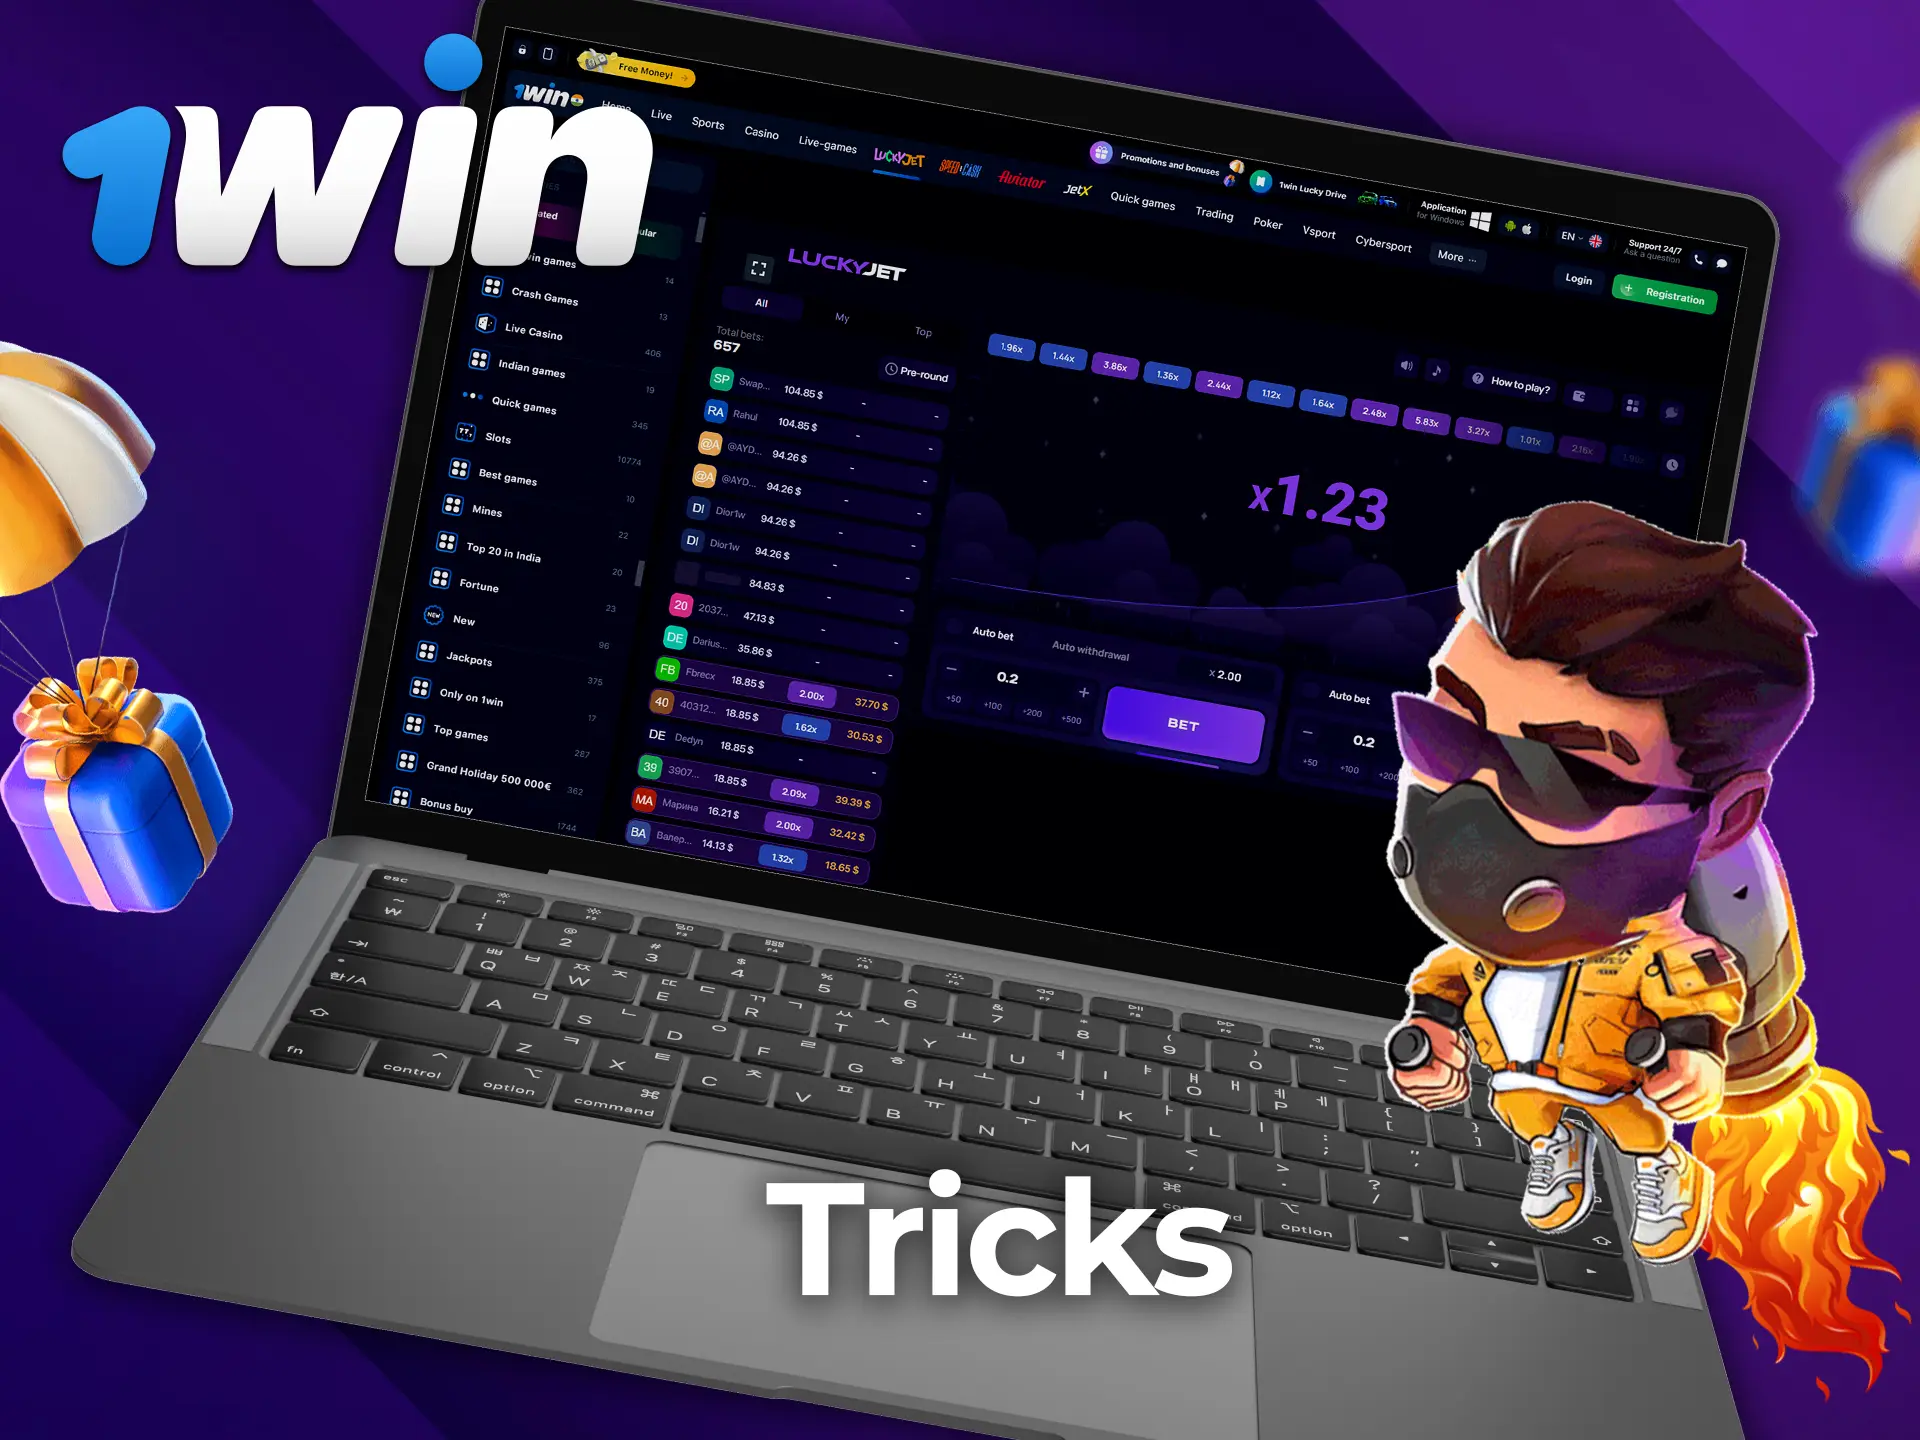 Using strategy and statistics will bring your chances of winning at 1Win Lucky Jet much closer.